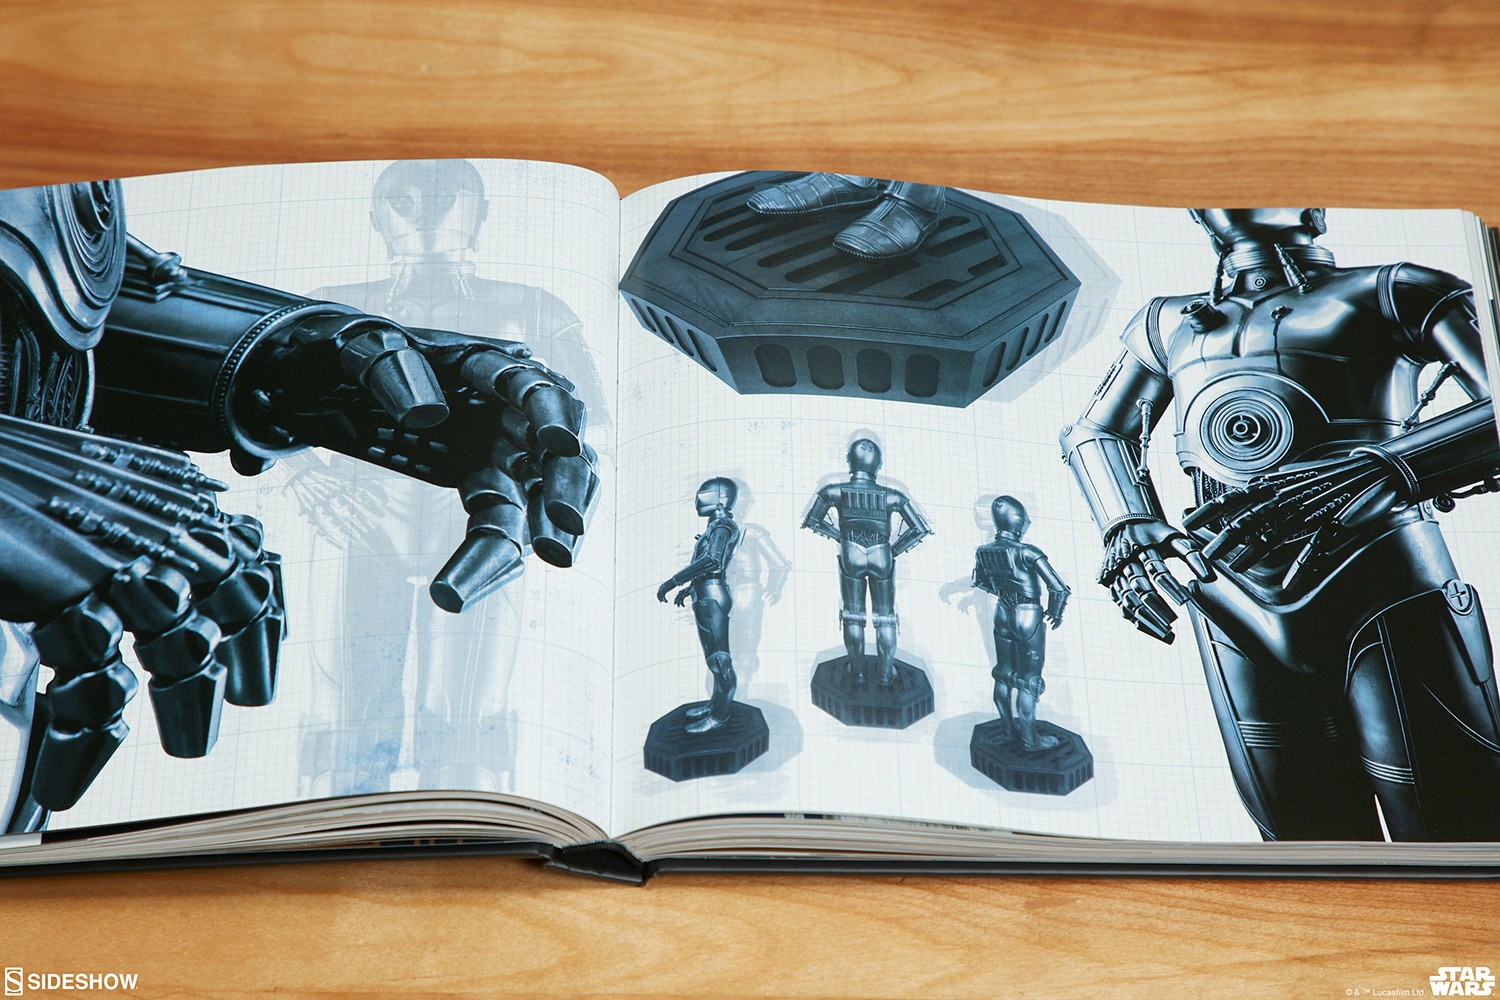 Star Wars: Collecting a Galaxy - The Art of Sideshow